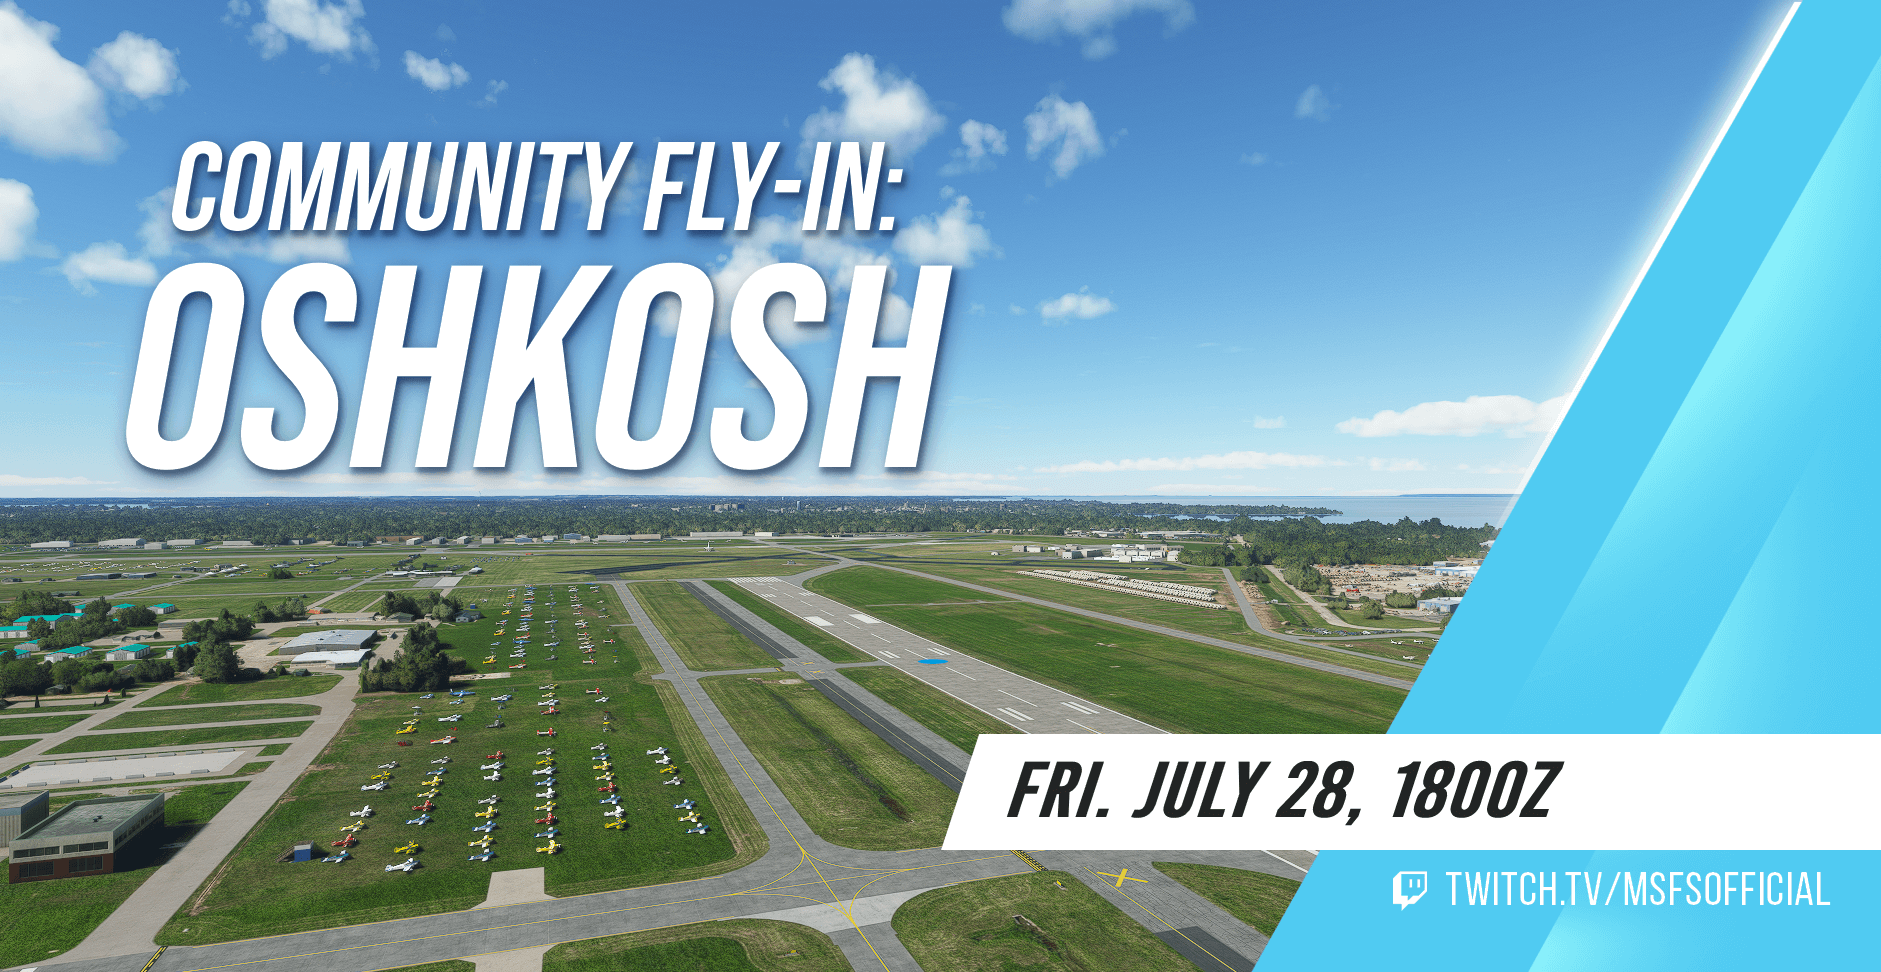 Community Fly-In: Oshkosh. Join us on Friday July 28 at 1800Z! You can watch at twitch.tv/msfsofficial